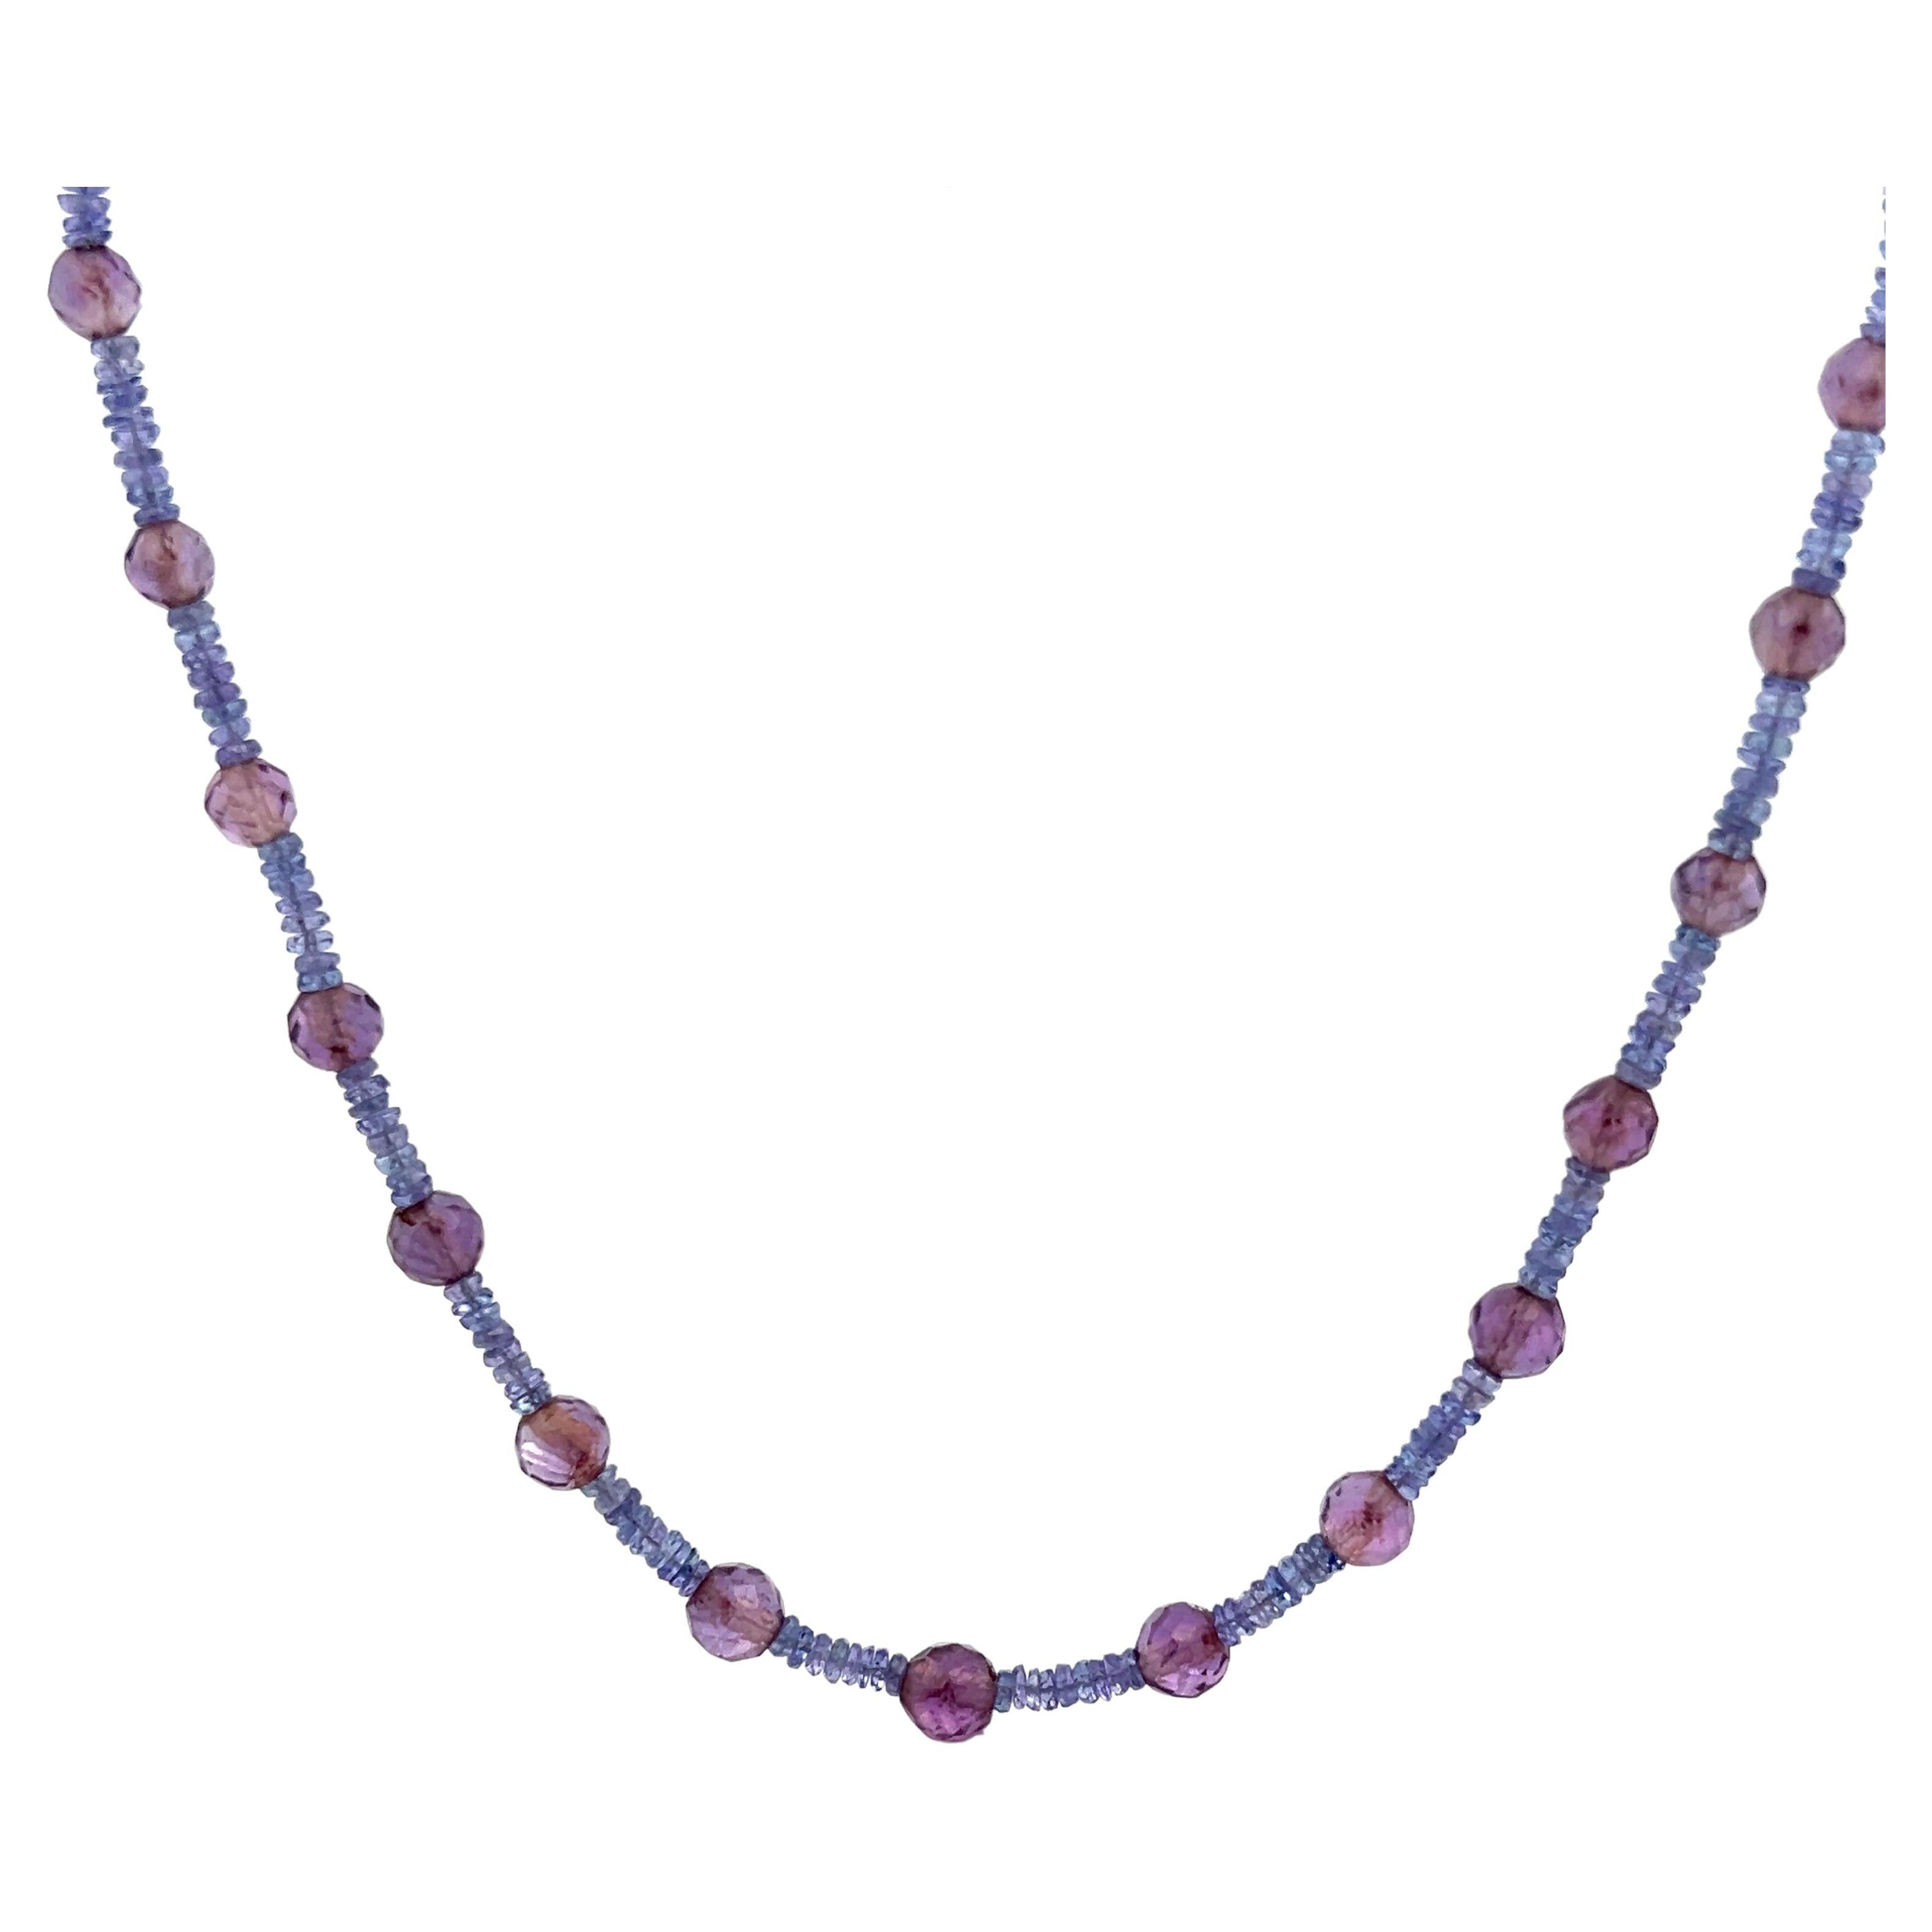 Tanzanite Amethyst Beads Sterling Silver Necklace